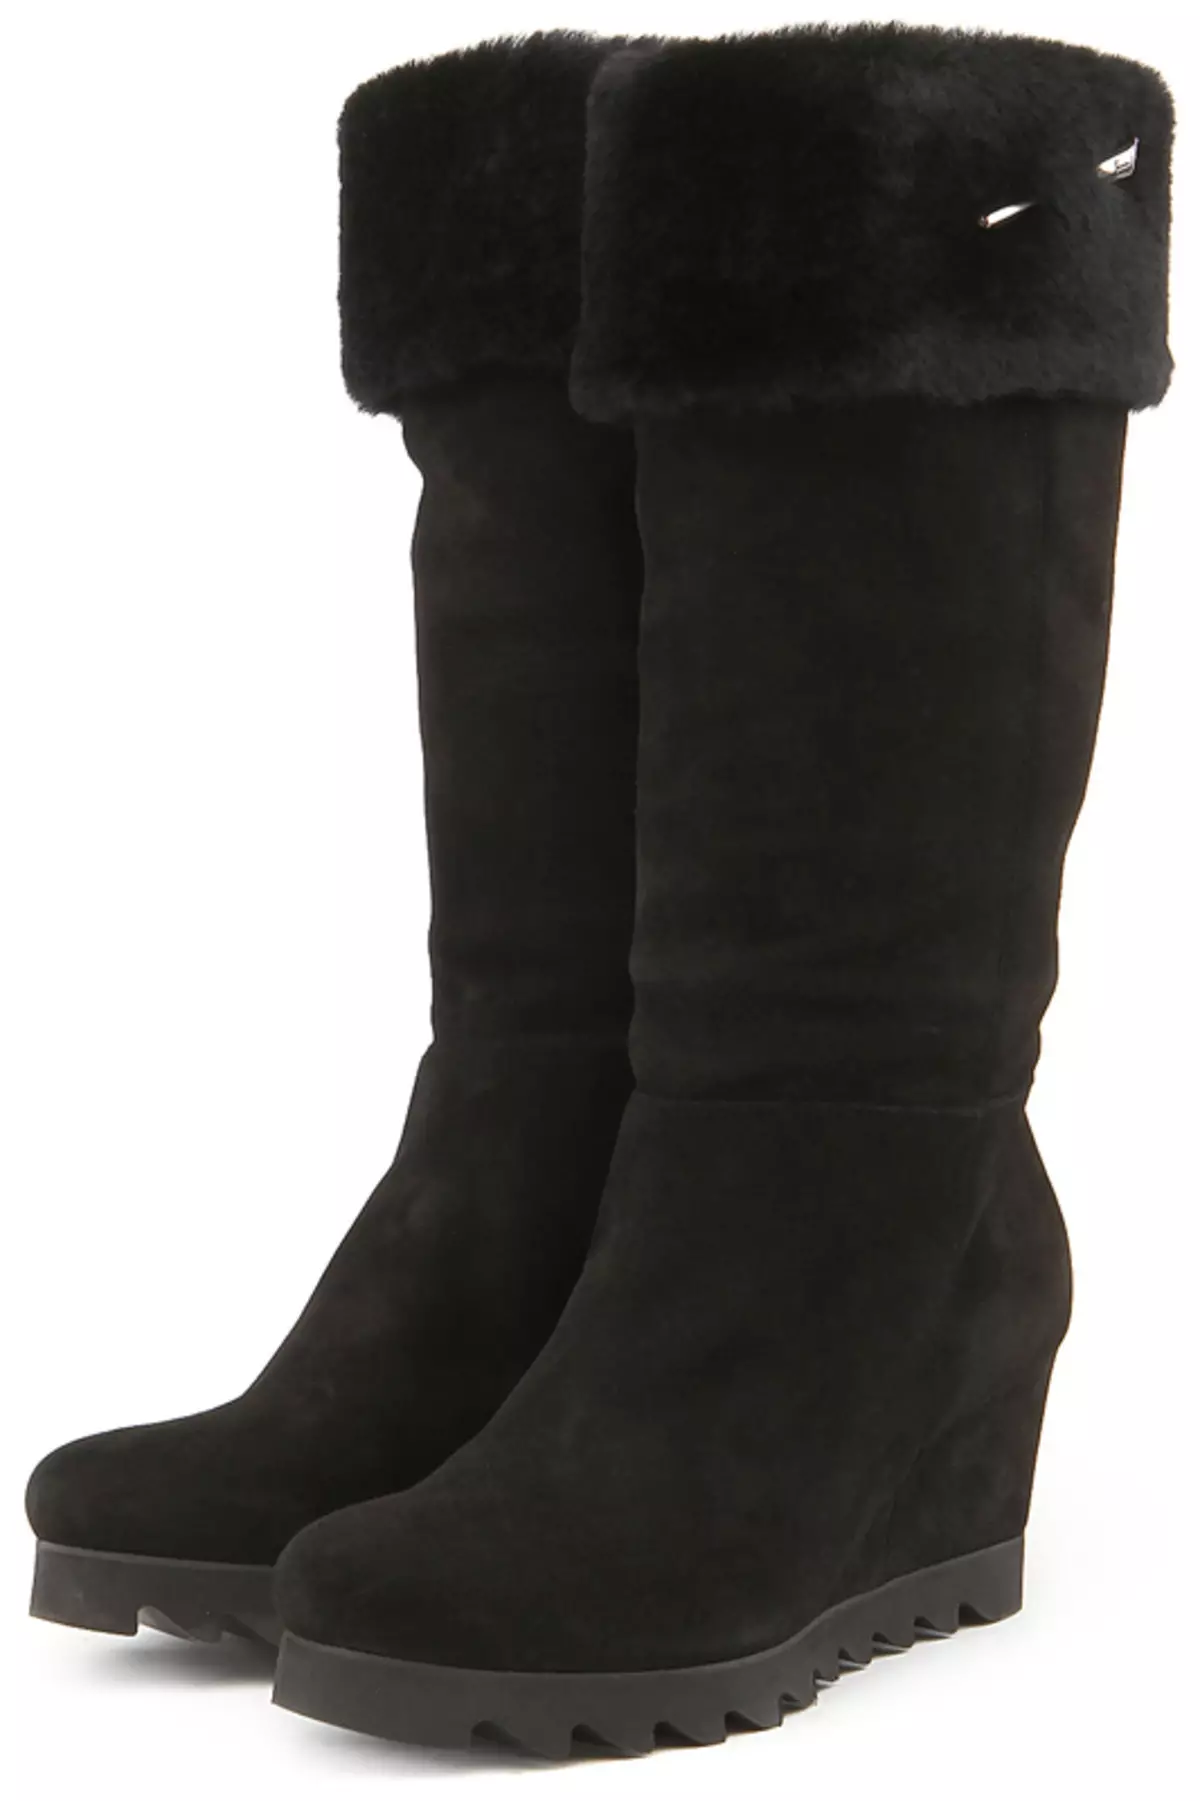 Loriblu boots (59 photos): Women's winter black and other suede patterns on a wedge, as well as with a wide balance 2222_32